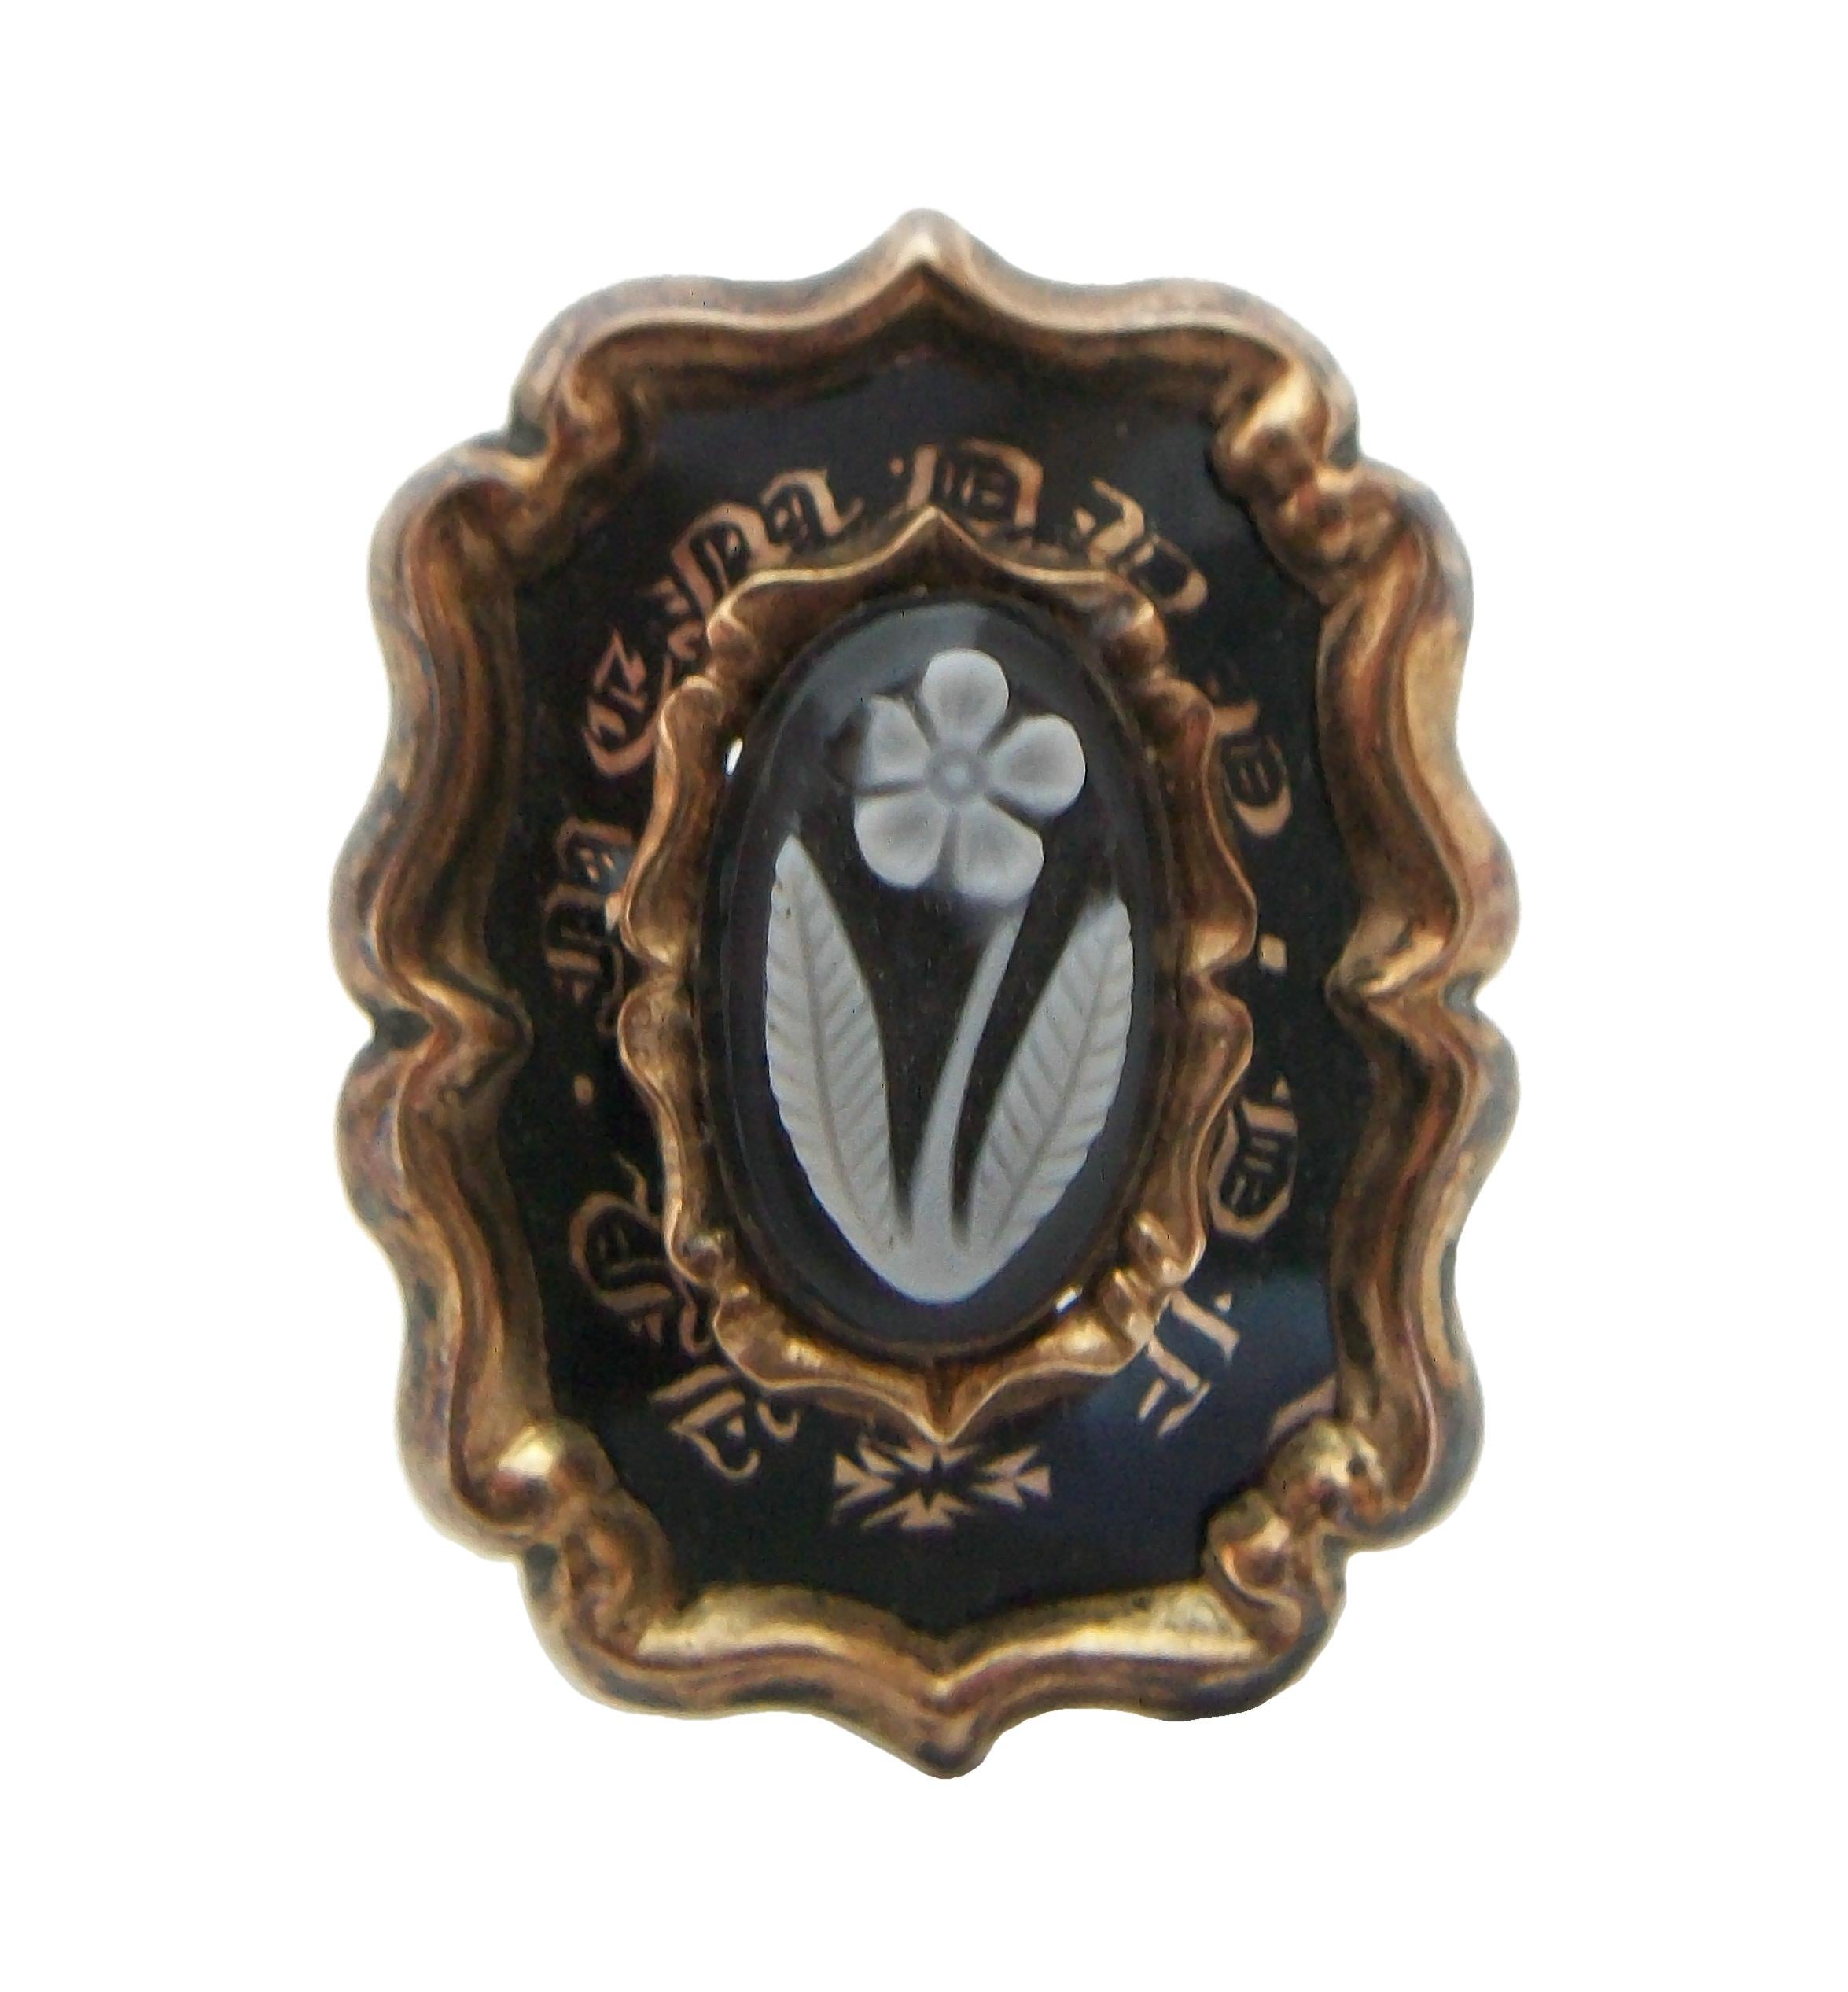 Georgian 15K yellow gold mourning brooch / pin - set with a carved floral agate cameo to the center (approx. 10 mm. x 6 mm.) - the cameo surrounded by an enamel and gold border inscribed with old English script 'IN MEMORY OF' - raised scrolling